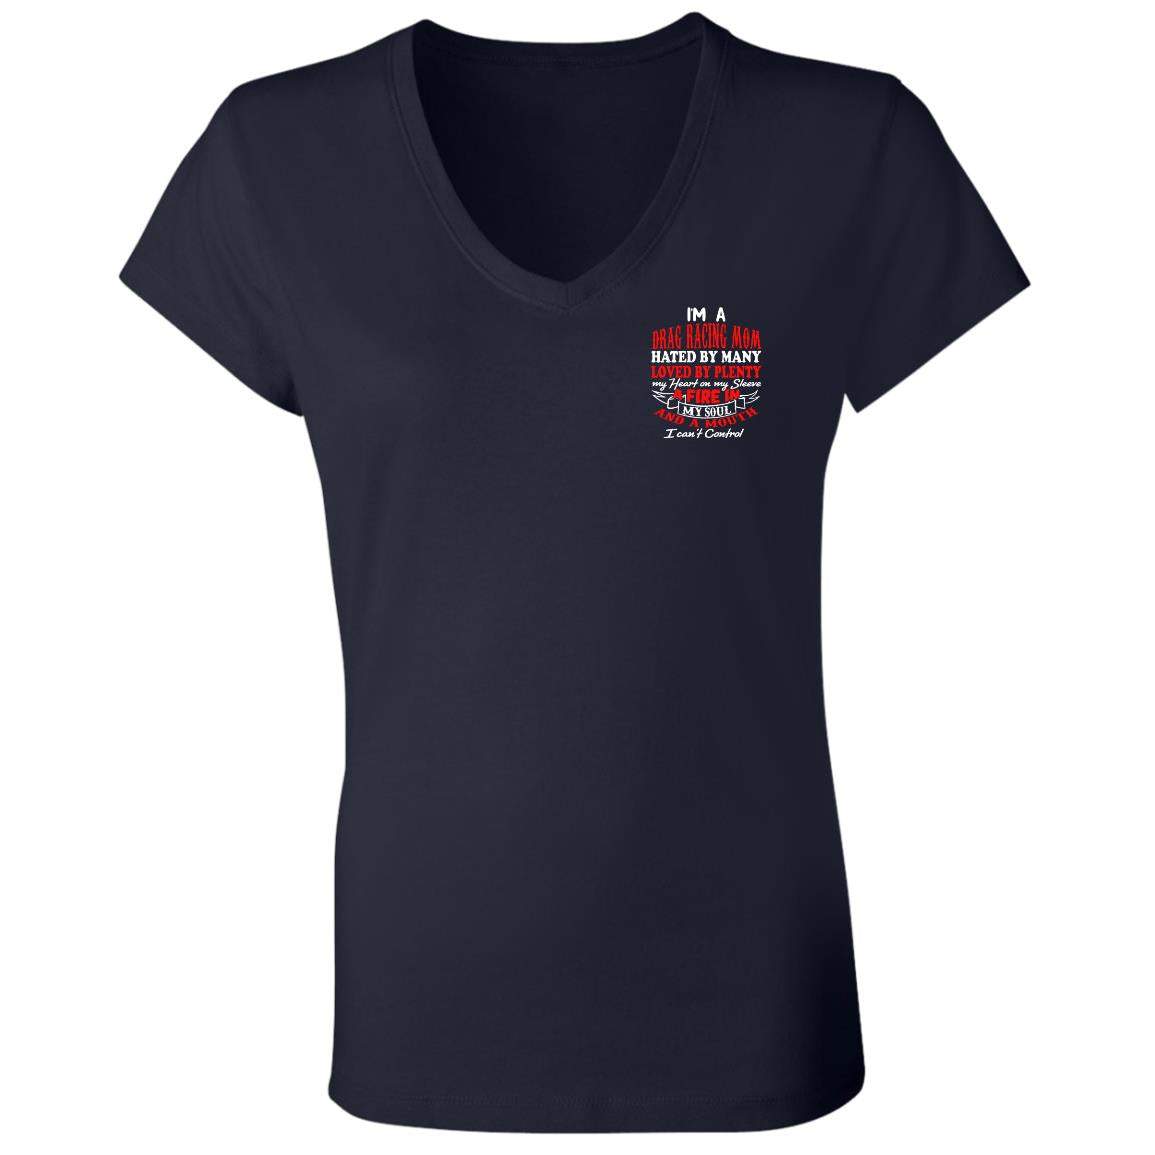 I'm A Drag Racing Mom Hated By Many Loved By Plenty Ladies' Jersey V-Neck T-Shirt